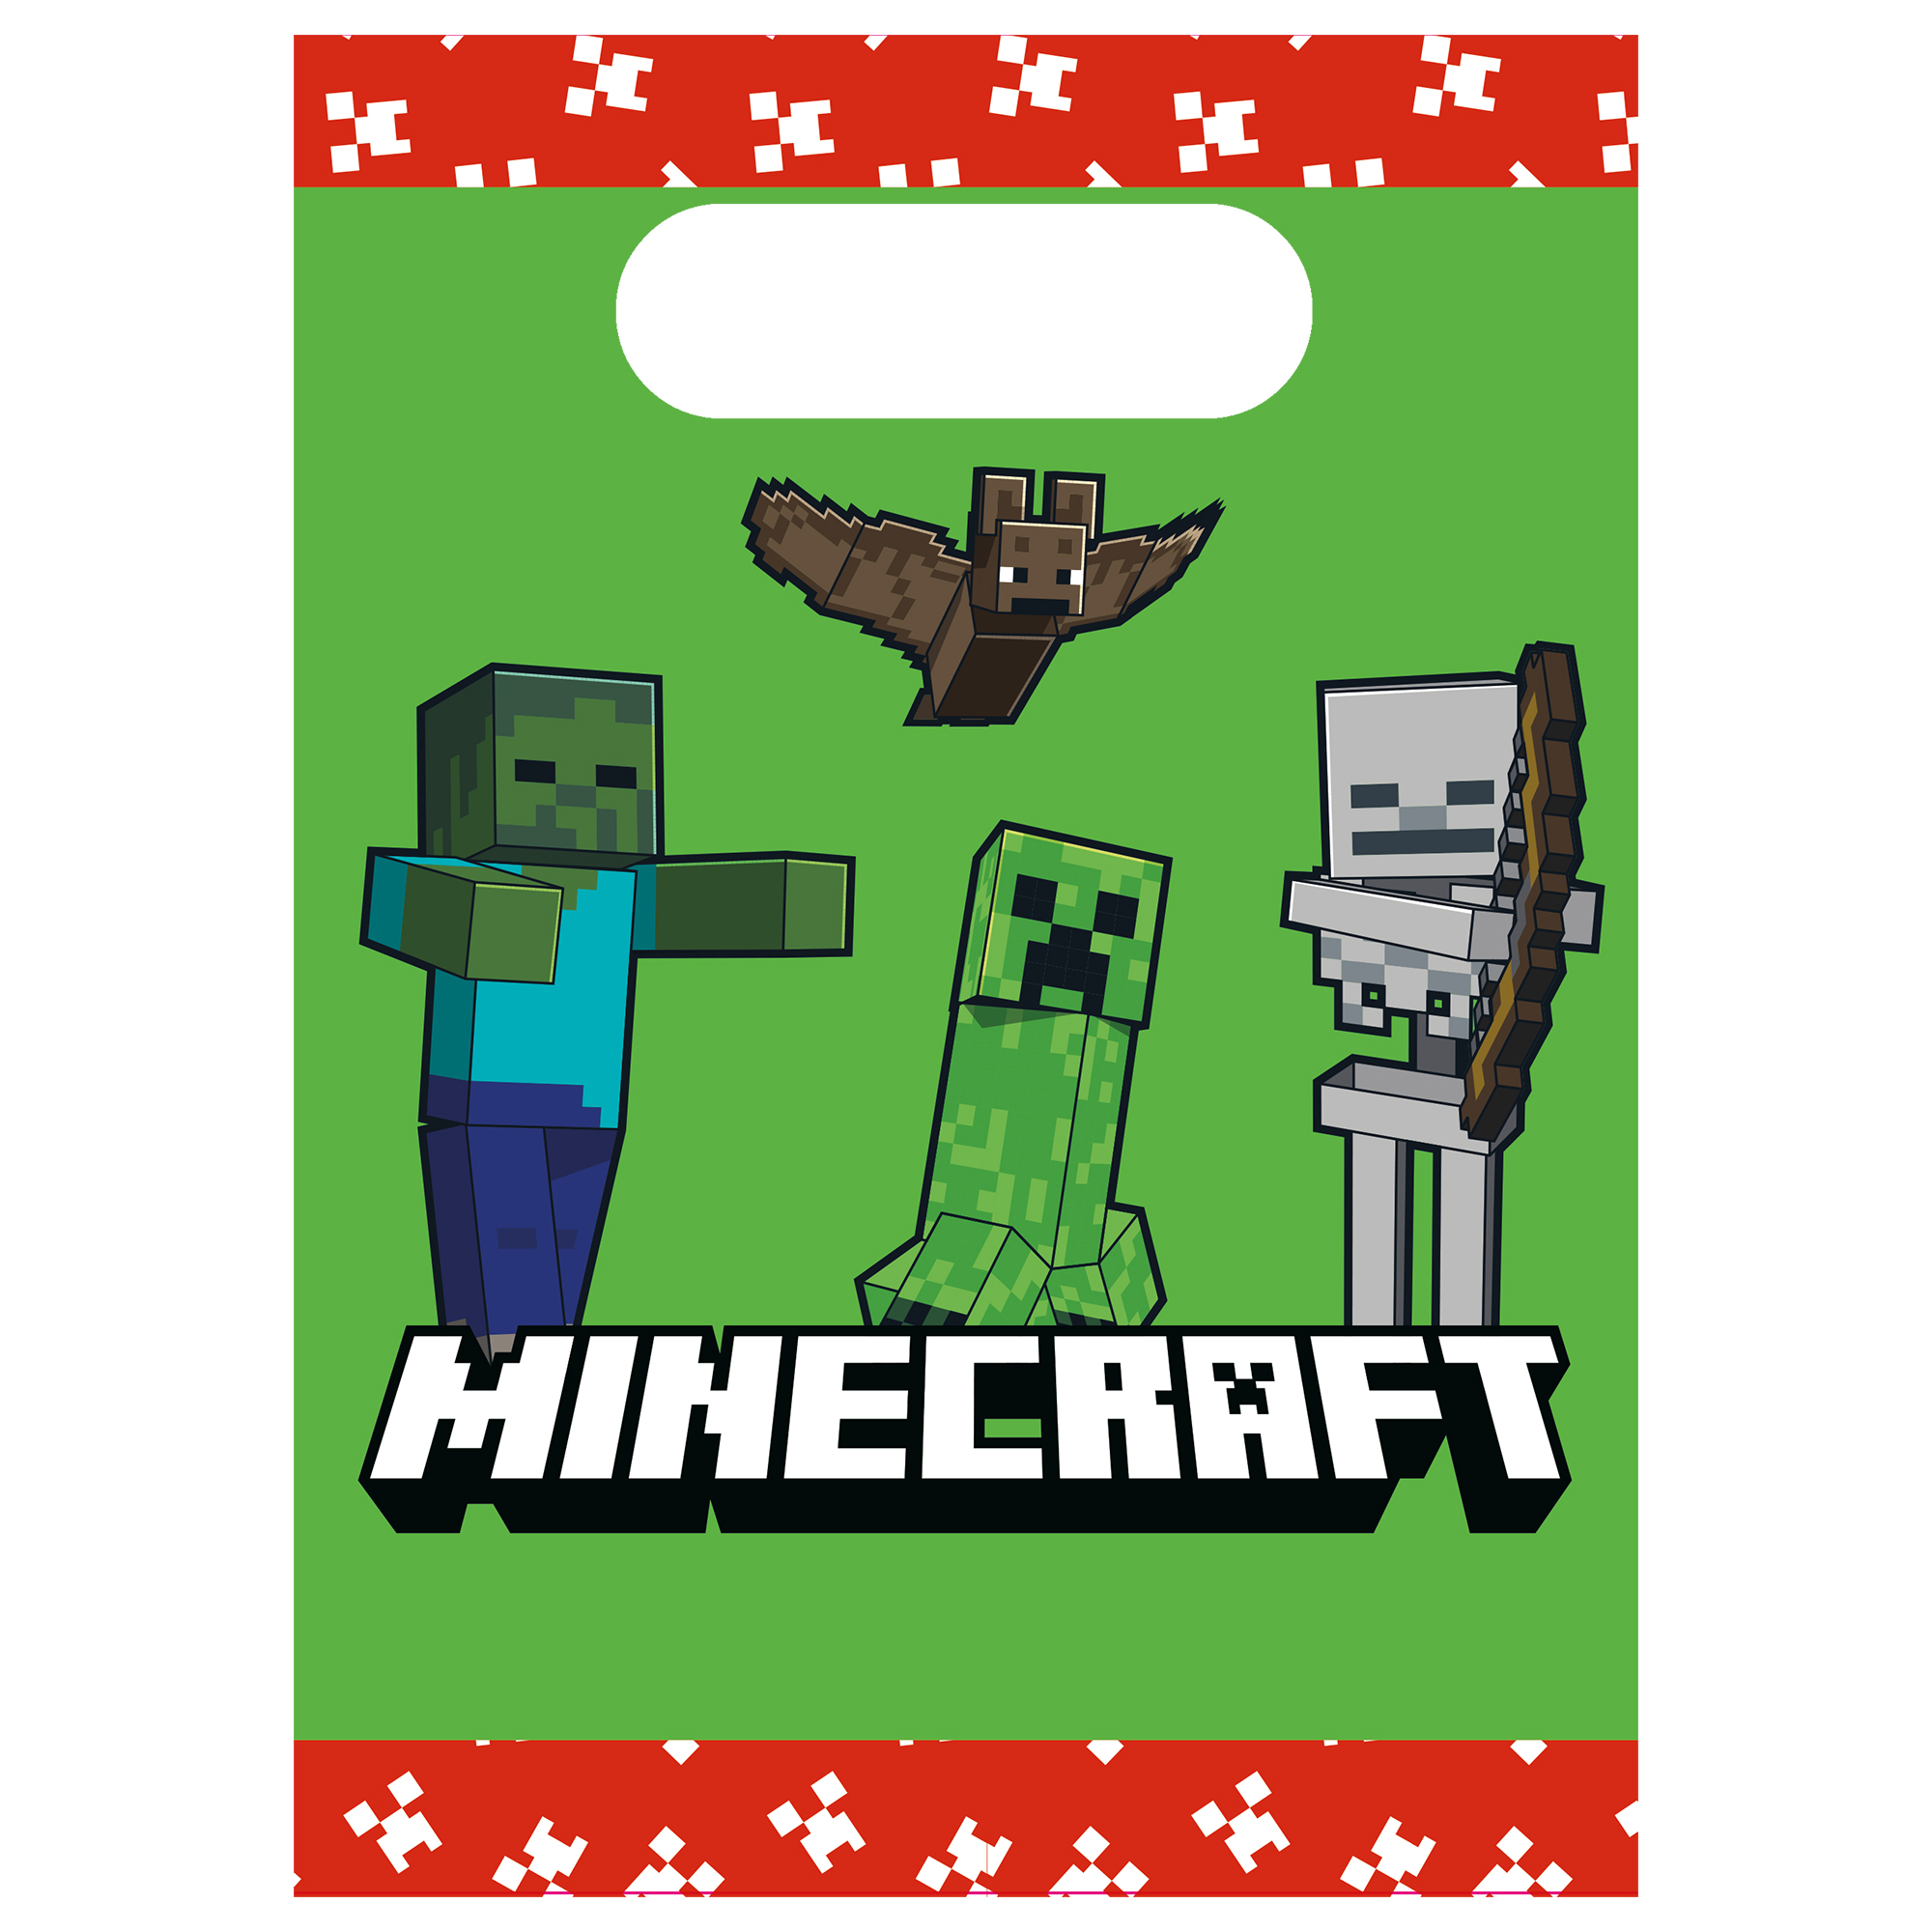 Minecraft Party Tableware & Decorations Bundle - 16 Guests